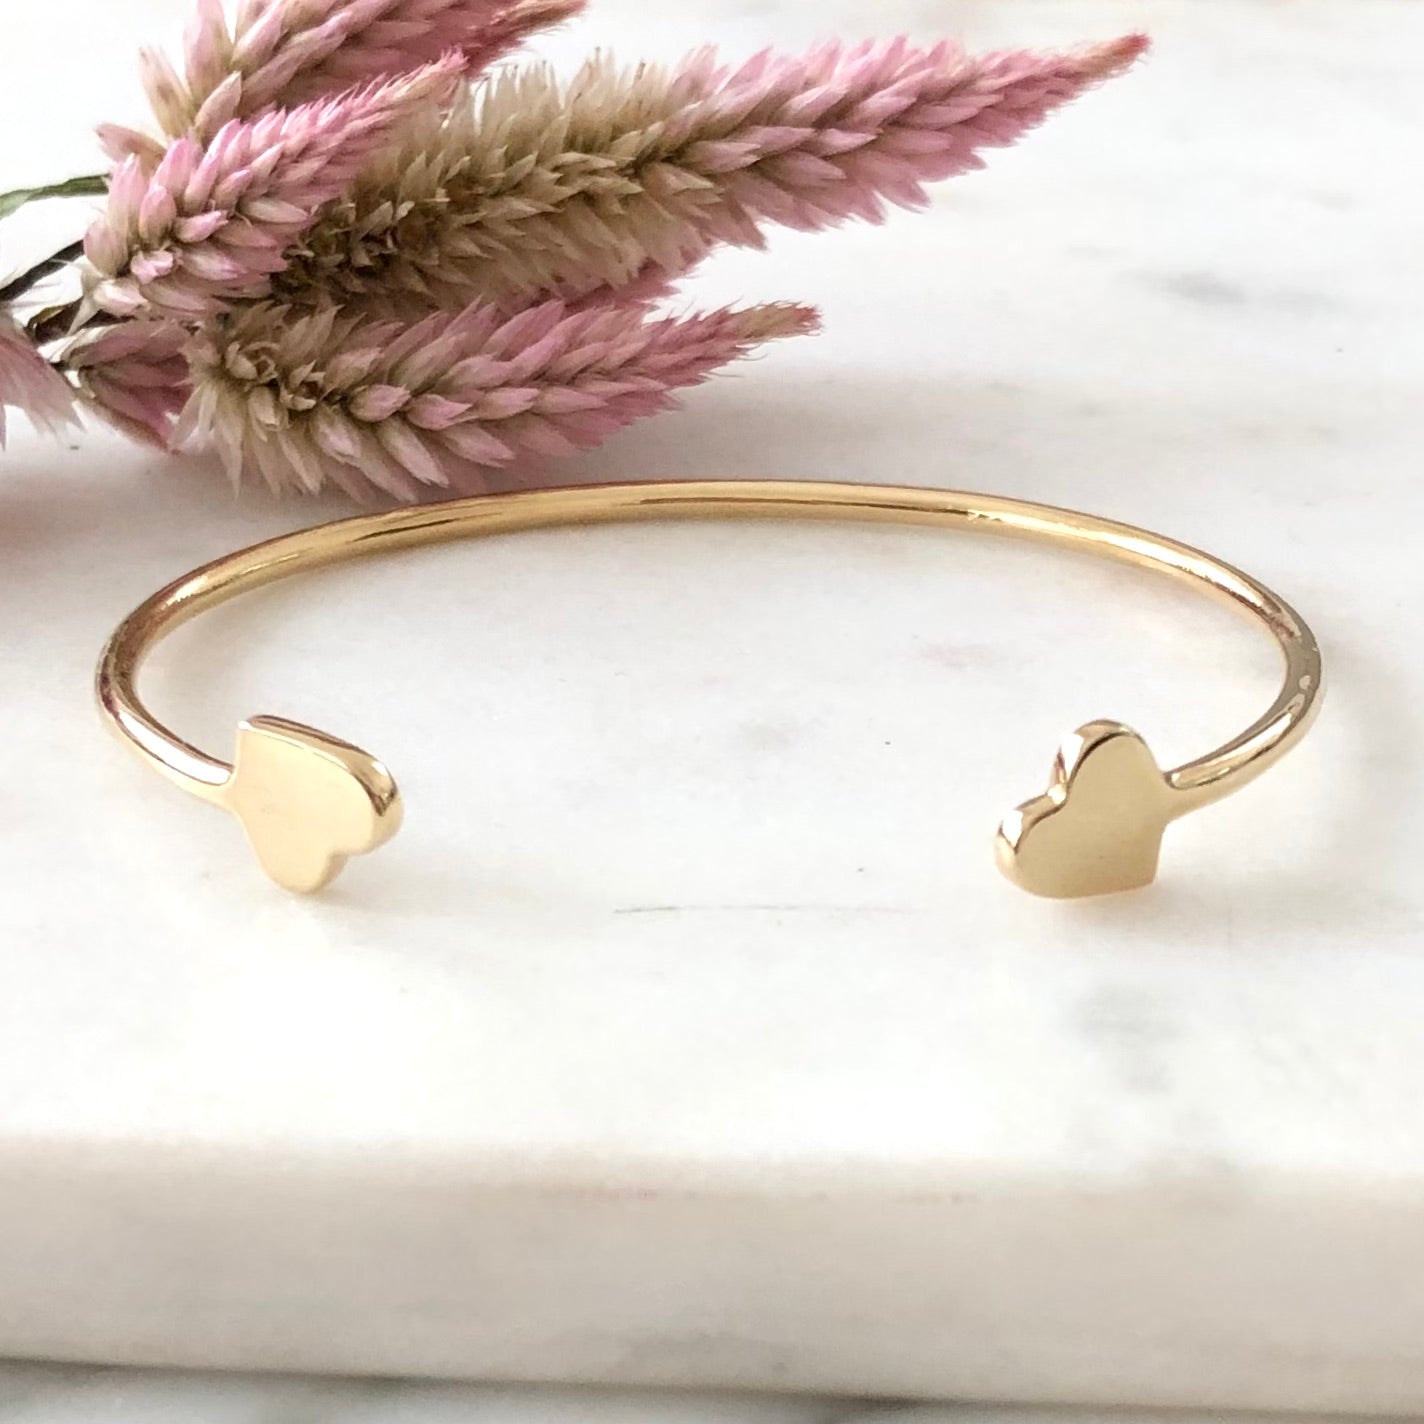 Gold cuff heart bracelet displayed on marble with a flower in the background.